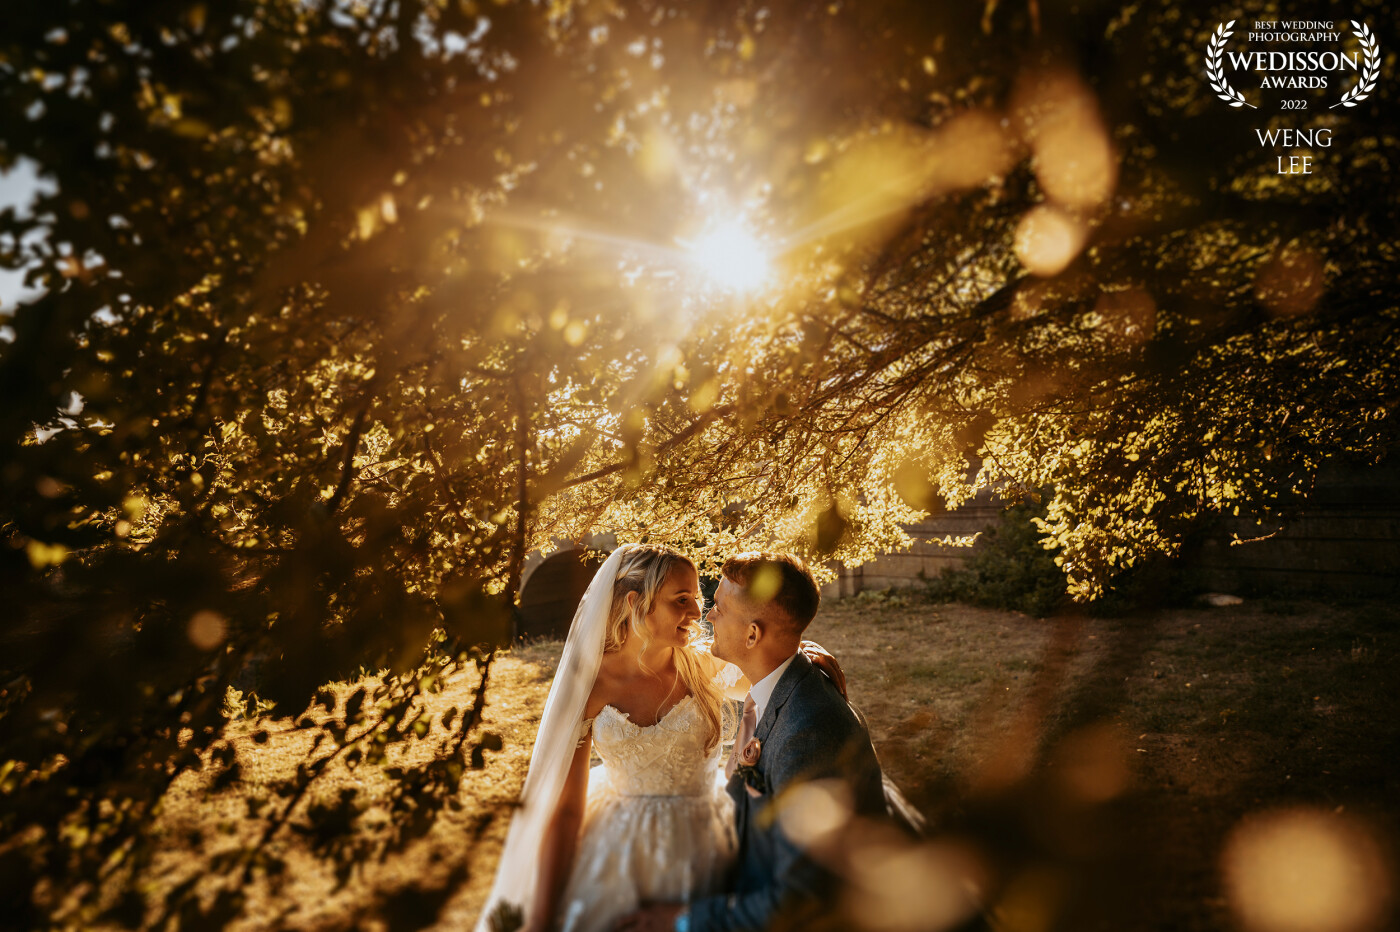 Amazing day capturing Beth & Kieran wedding day at The White Swan, scotter, in ime for those Sunset light give perfection back led.